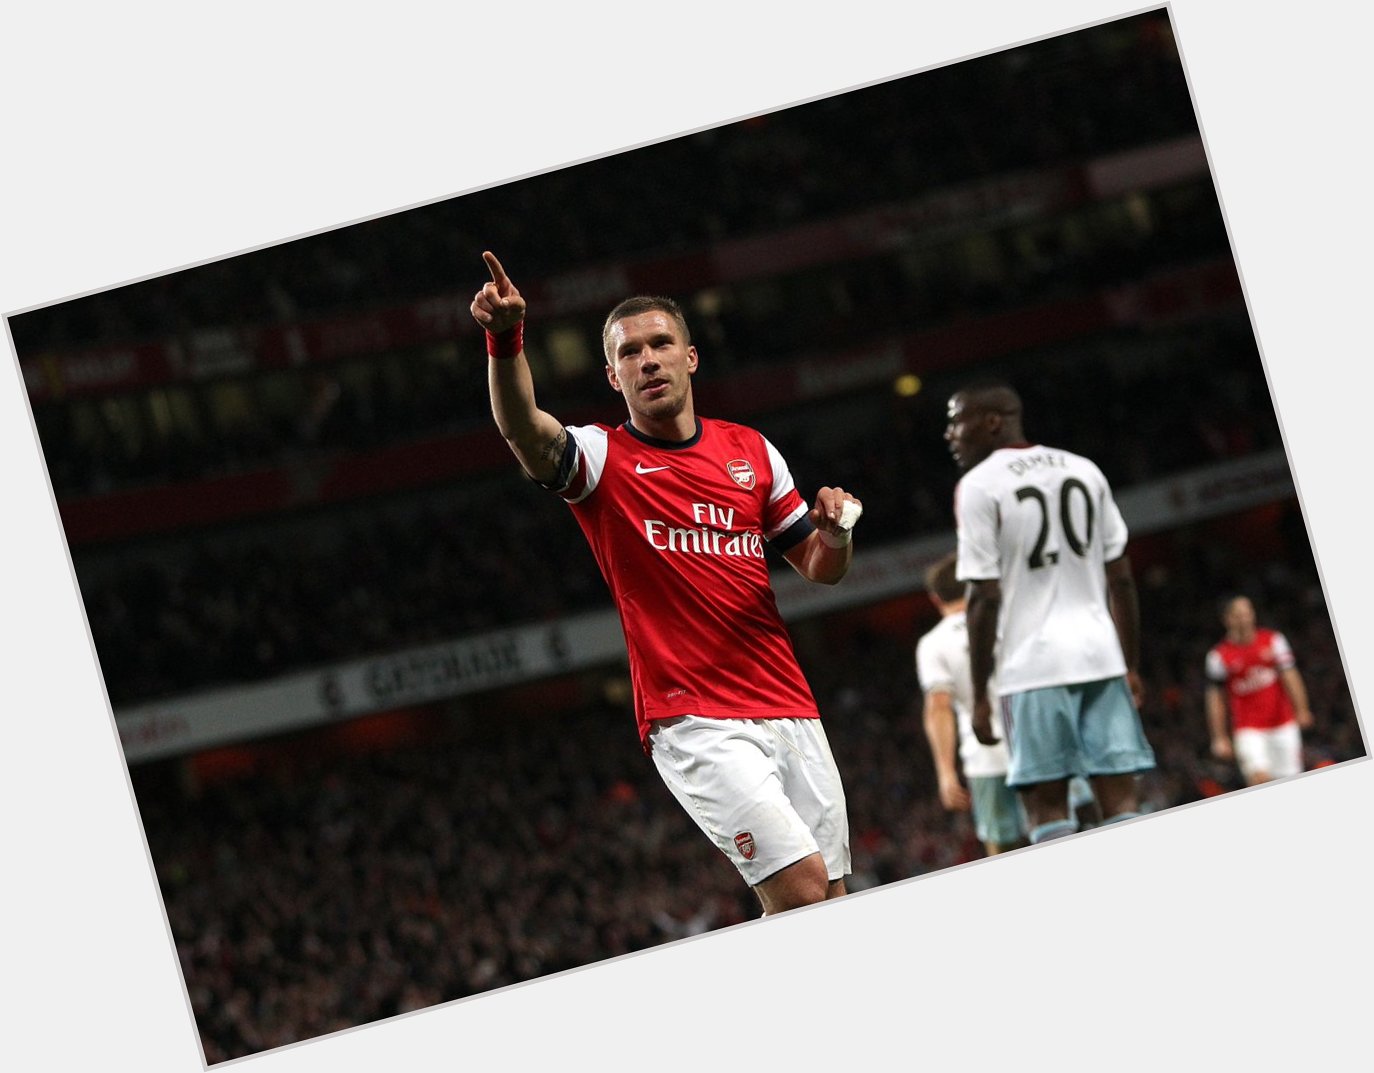 Happy 35th Birthday to Lukas Podolski! A top player who had an absolute worldie of a left foot! 